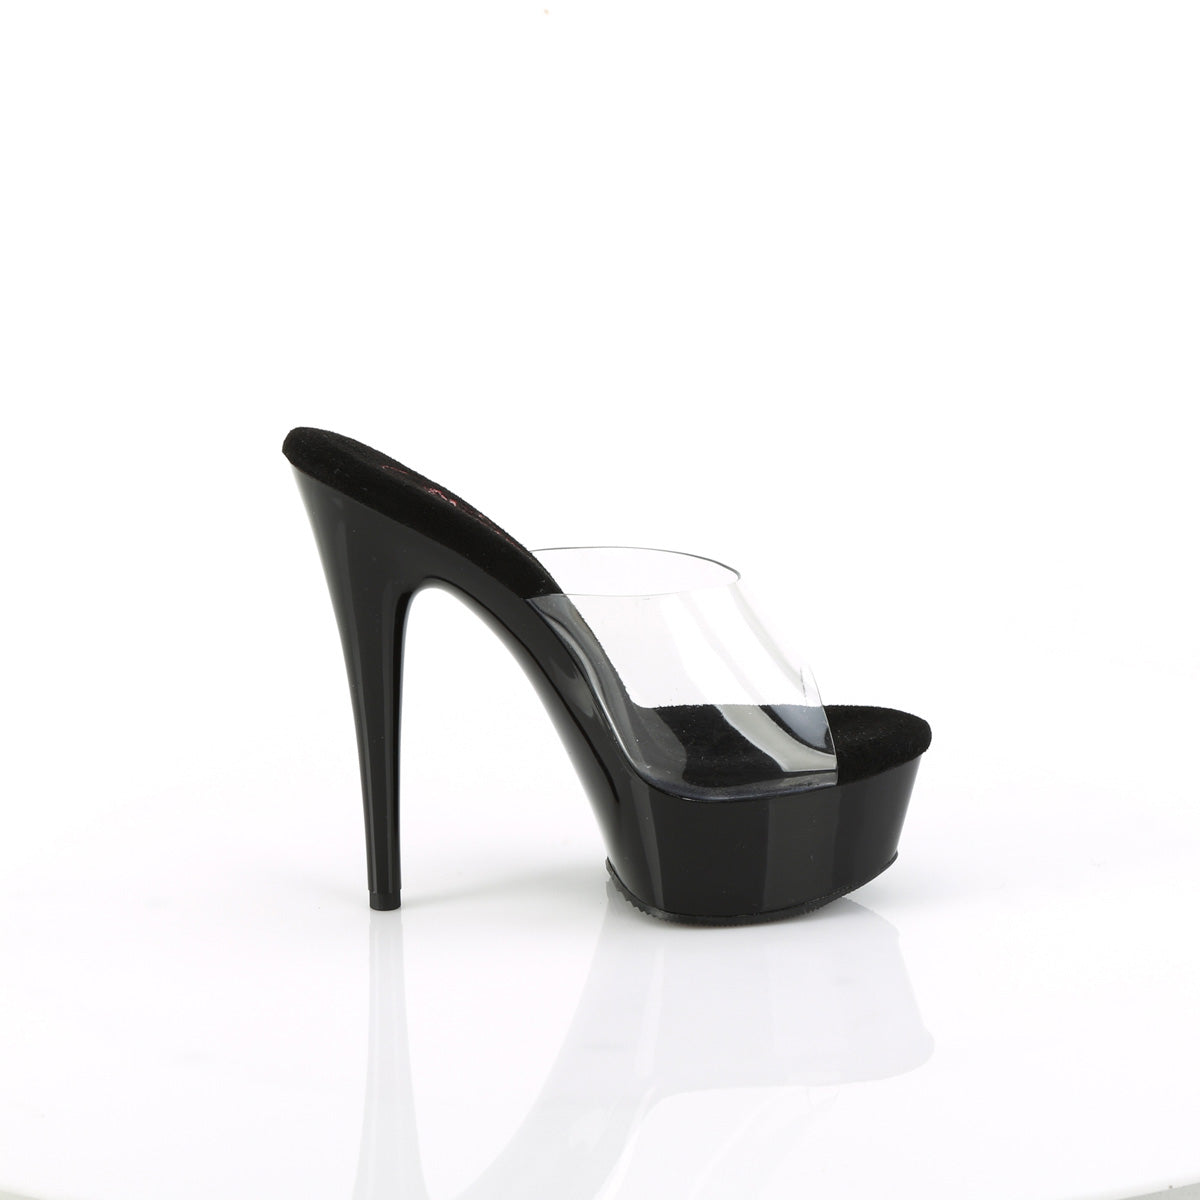 6 Inch Heel EXCITE-601 Clear Black